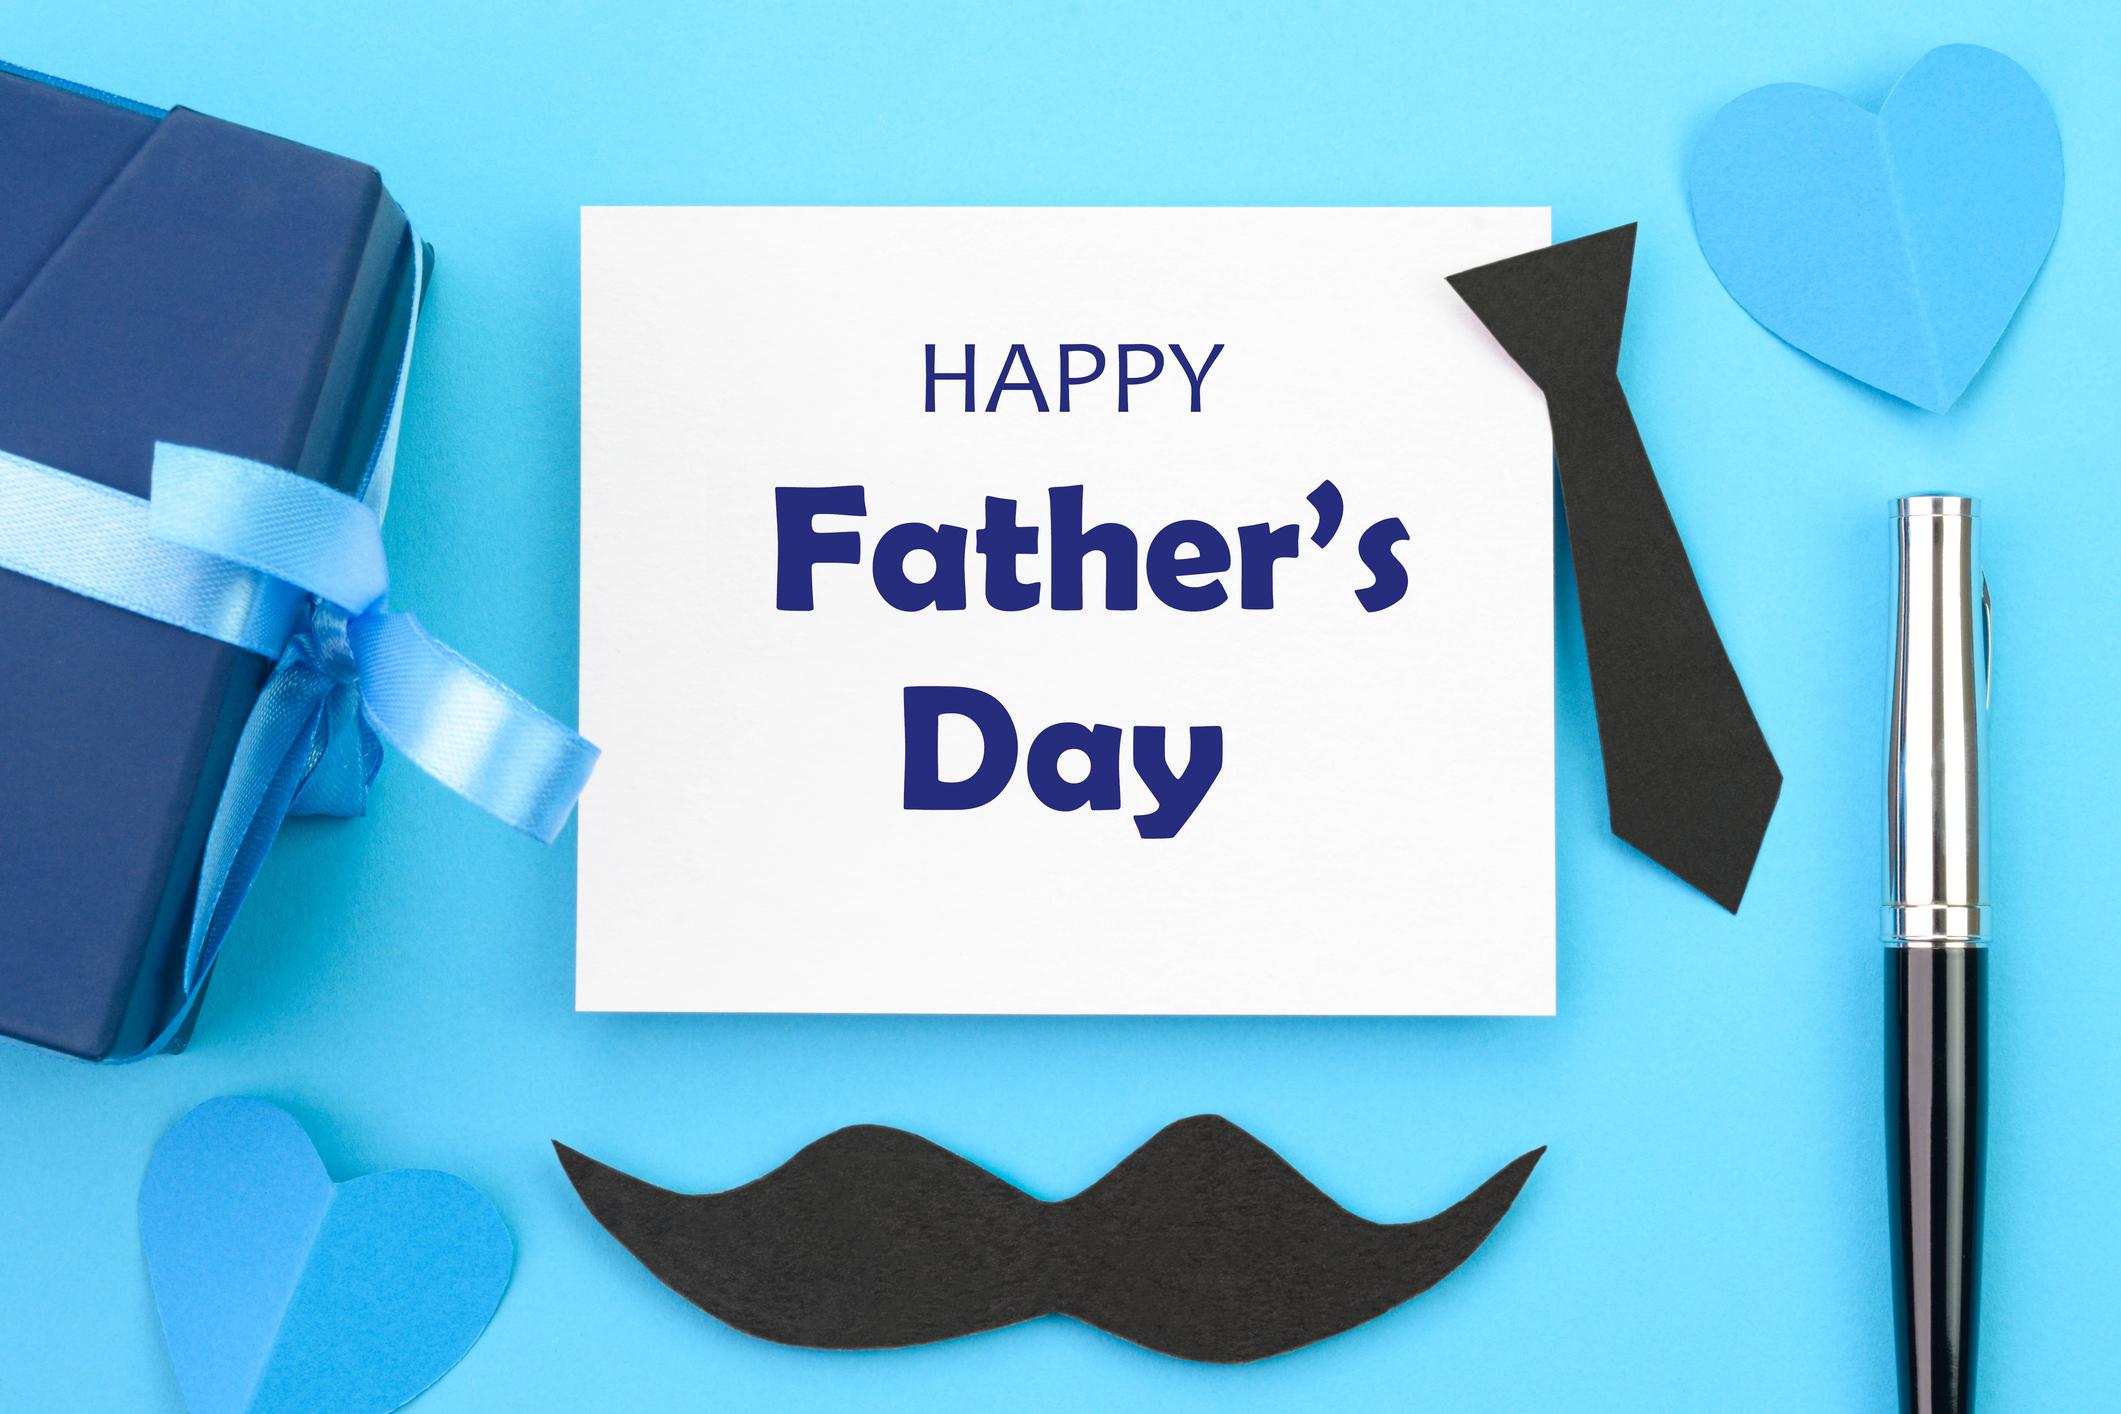  Happy Father's Day card against a blue background. With a black tie and moustache beside the card.  